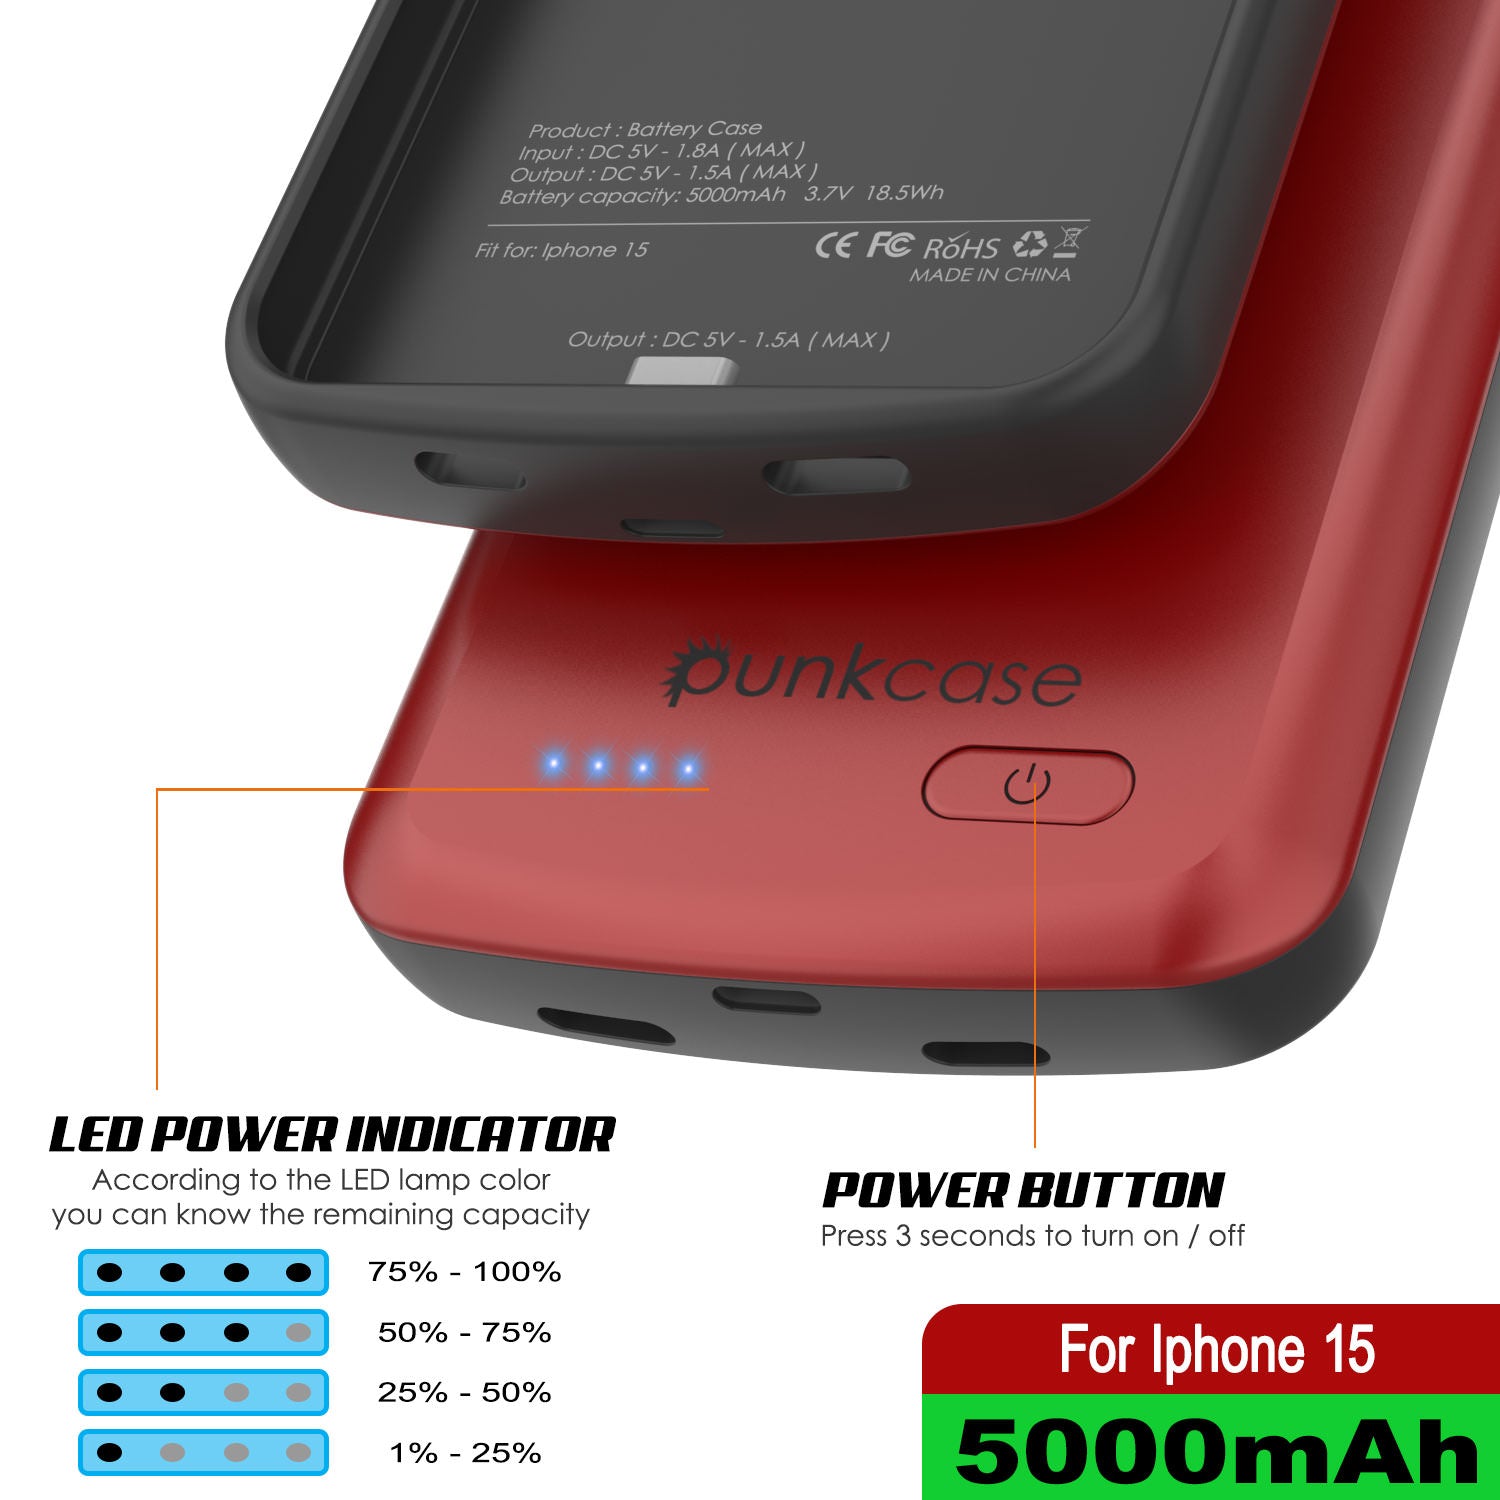 iPhone 15 Battery Case, PunkJuice 5000mAH Fast Charging Power Bank W/ Screen Protector | [Red]